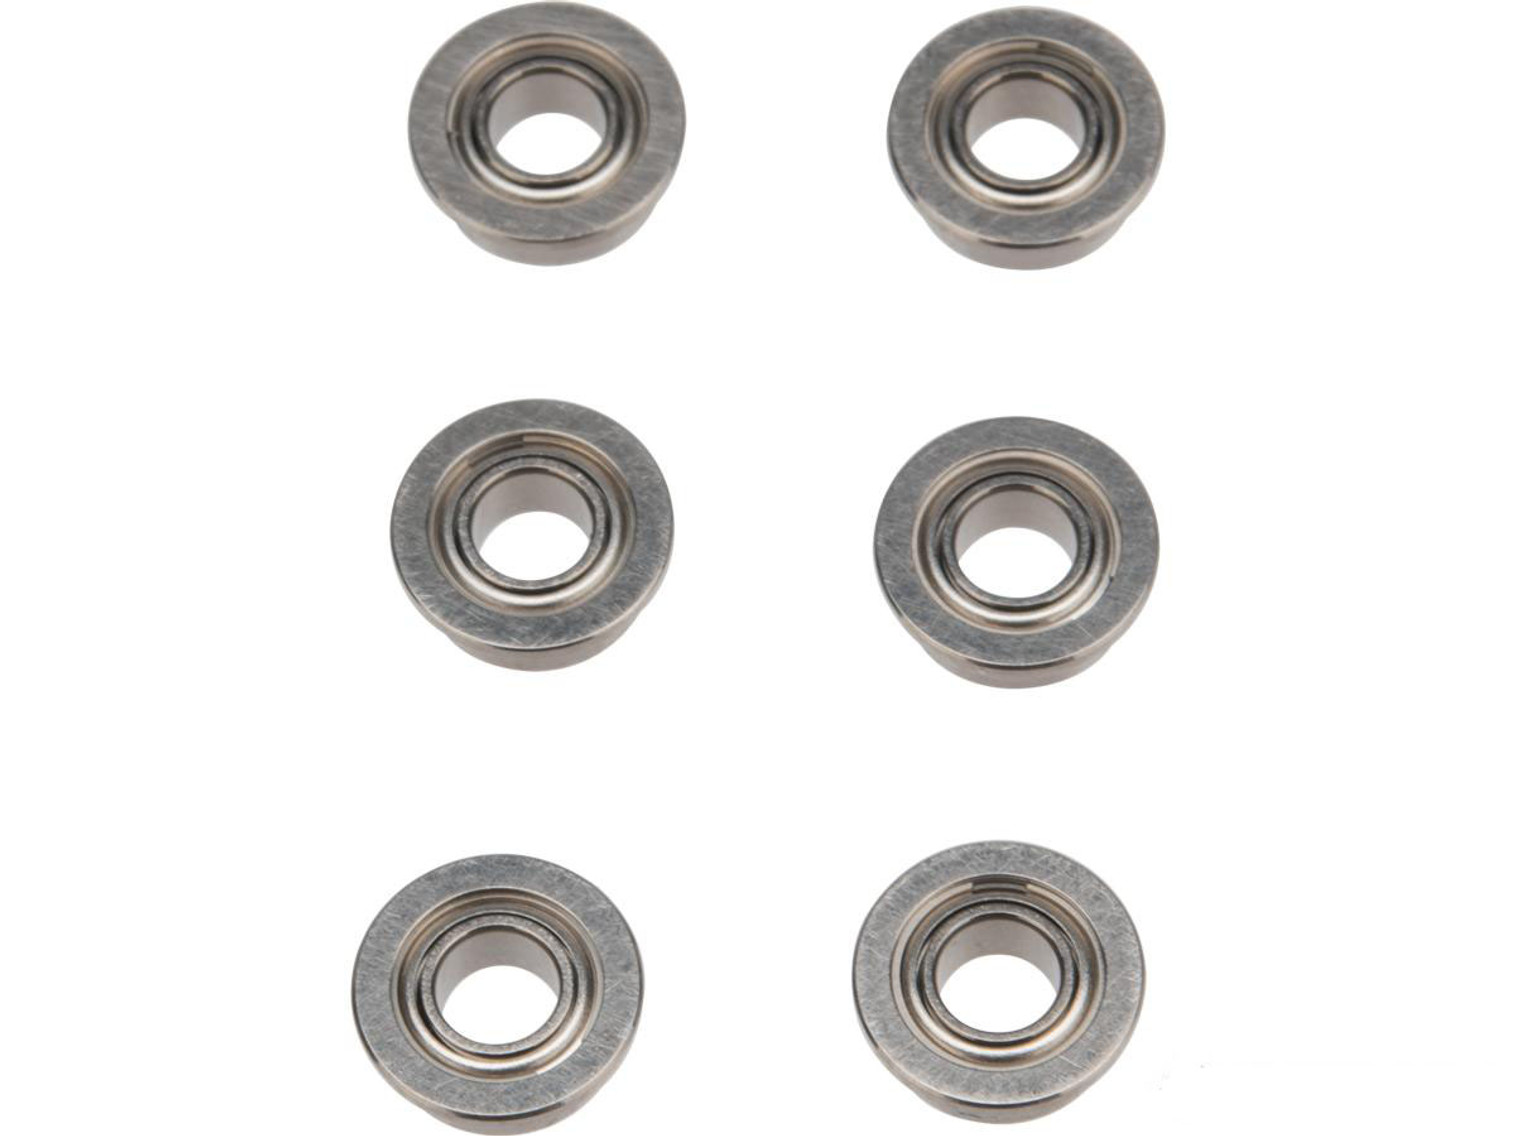 Prometheus Stainless Steel Bearings - Set of Six (Size: 7mm)